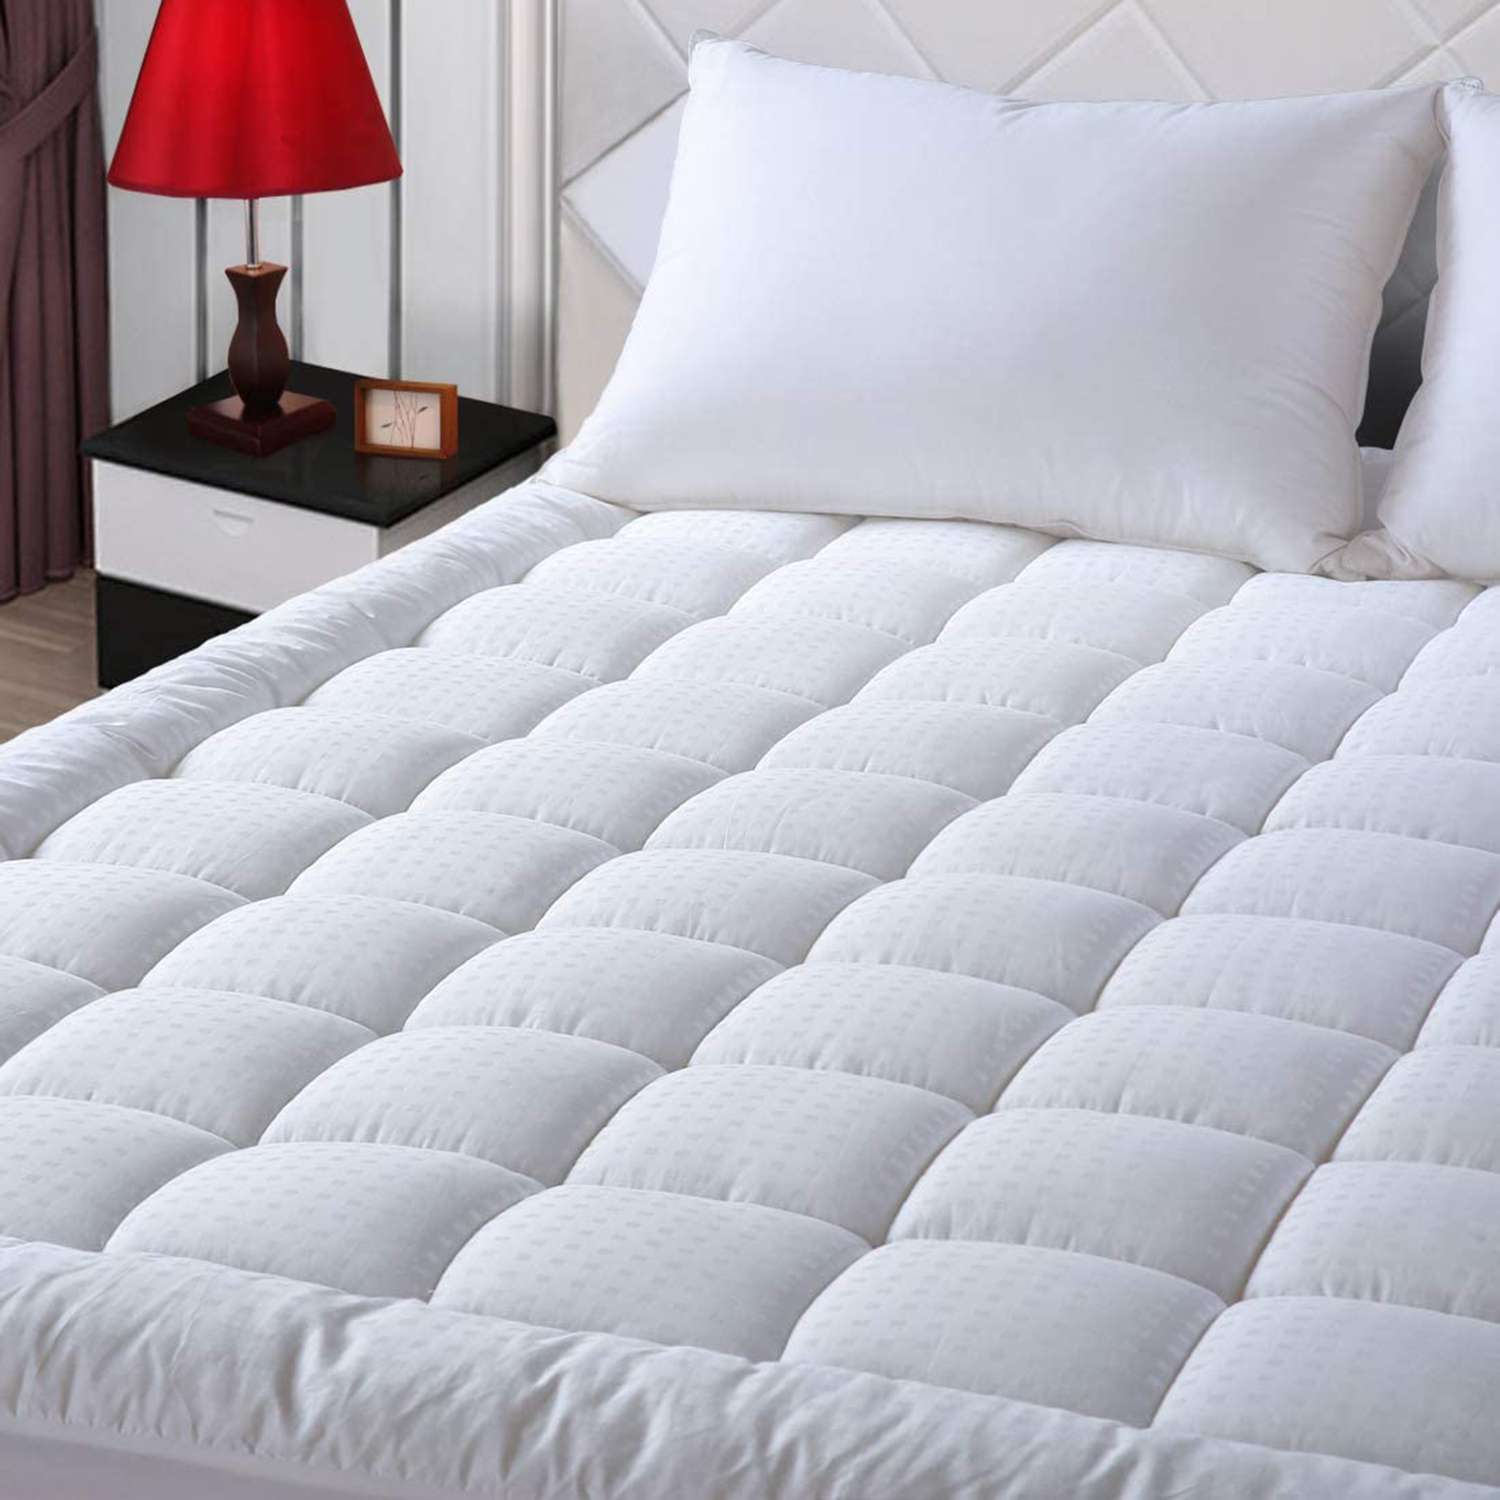 Thick Queen Size Mattress Pad Cover Pillow Top Topper Padded Luxury Bed Cooling 